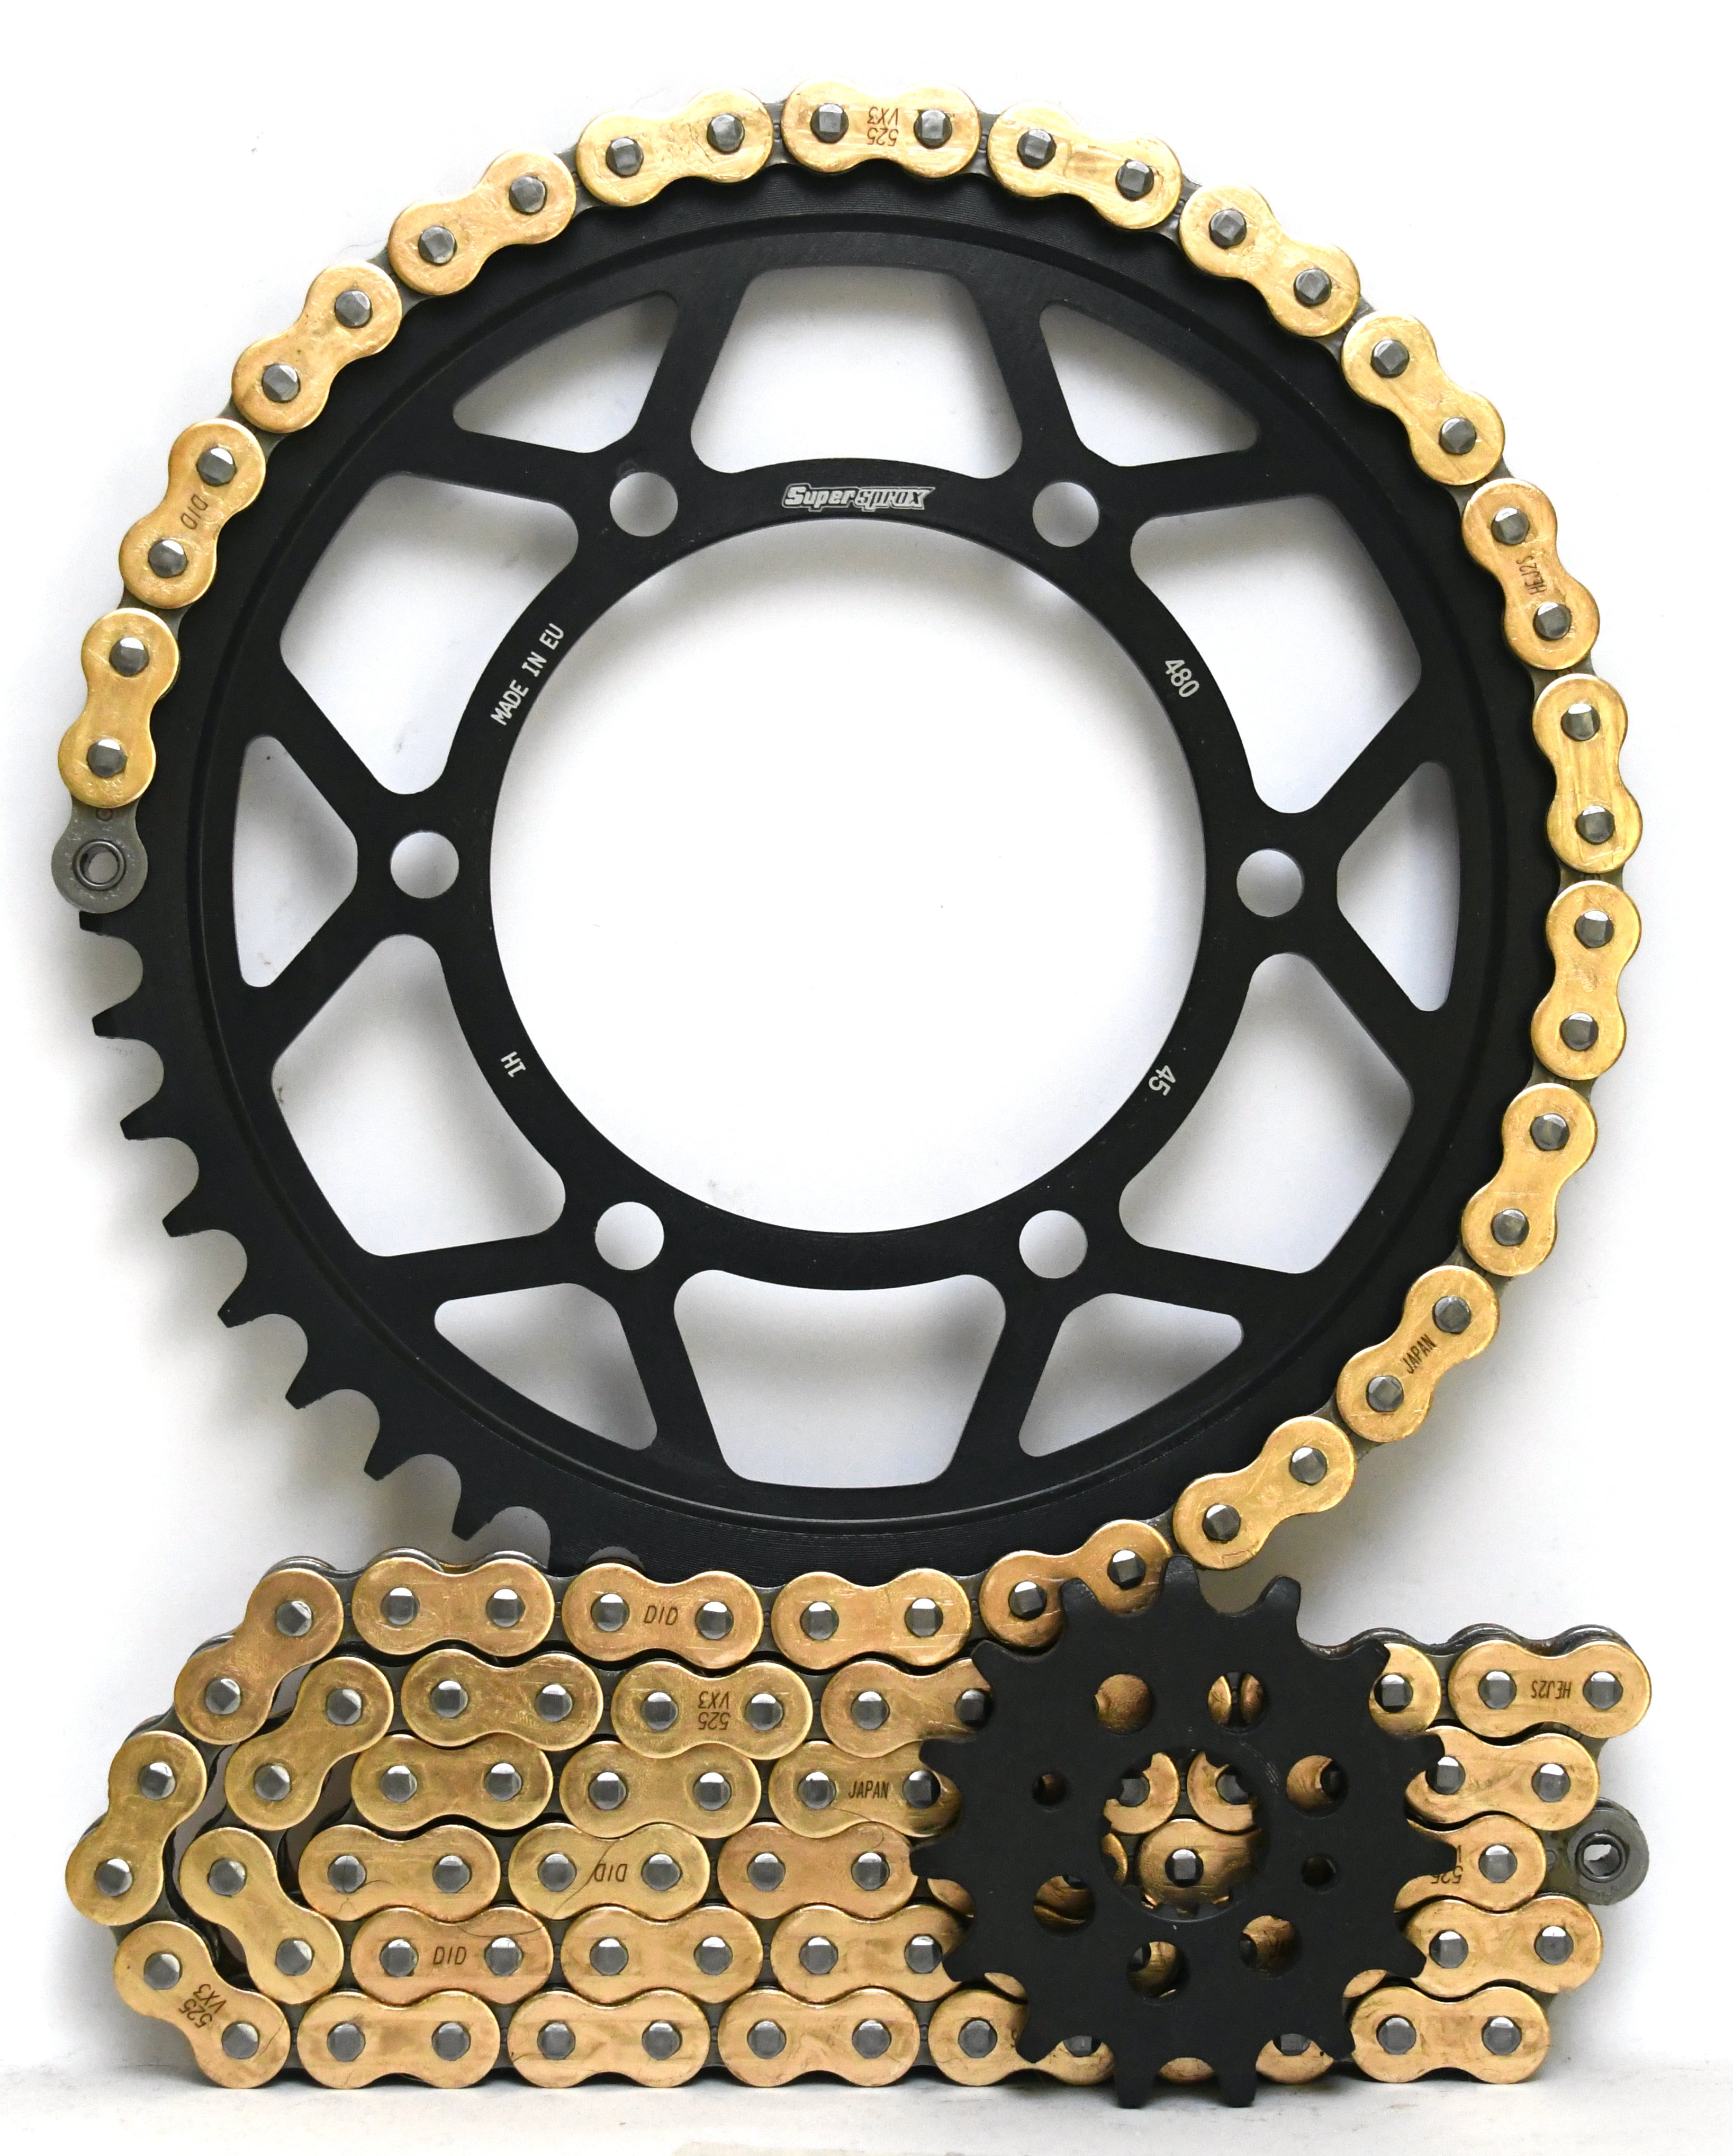 Supersprox and DID Chain and Steel Sprocket Kit - Yamaha MT-10 (Inc SP) Standard Gearing